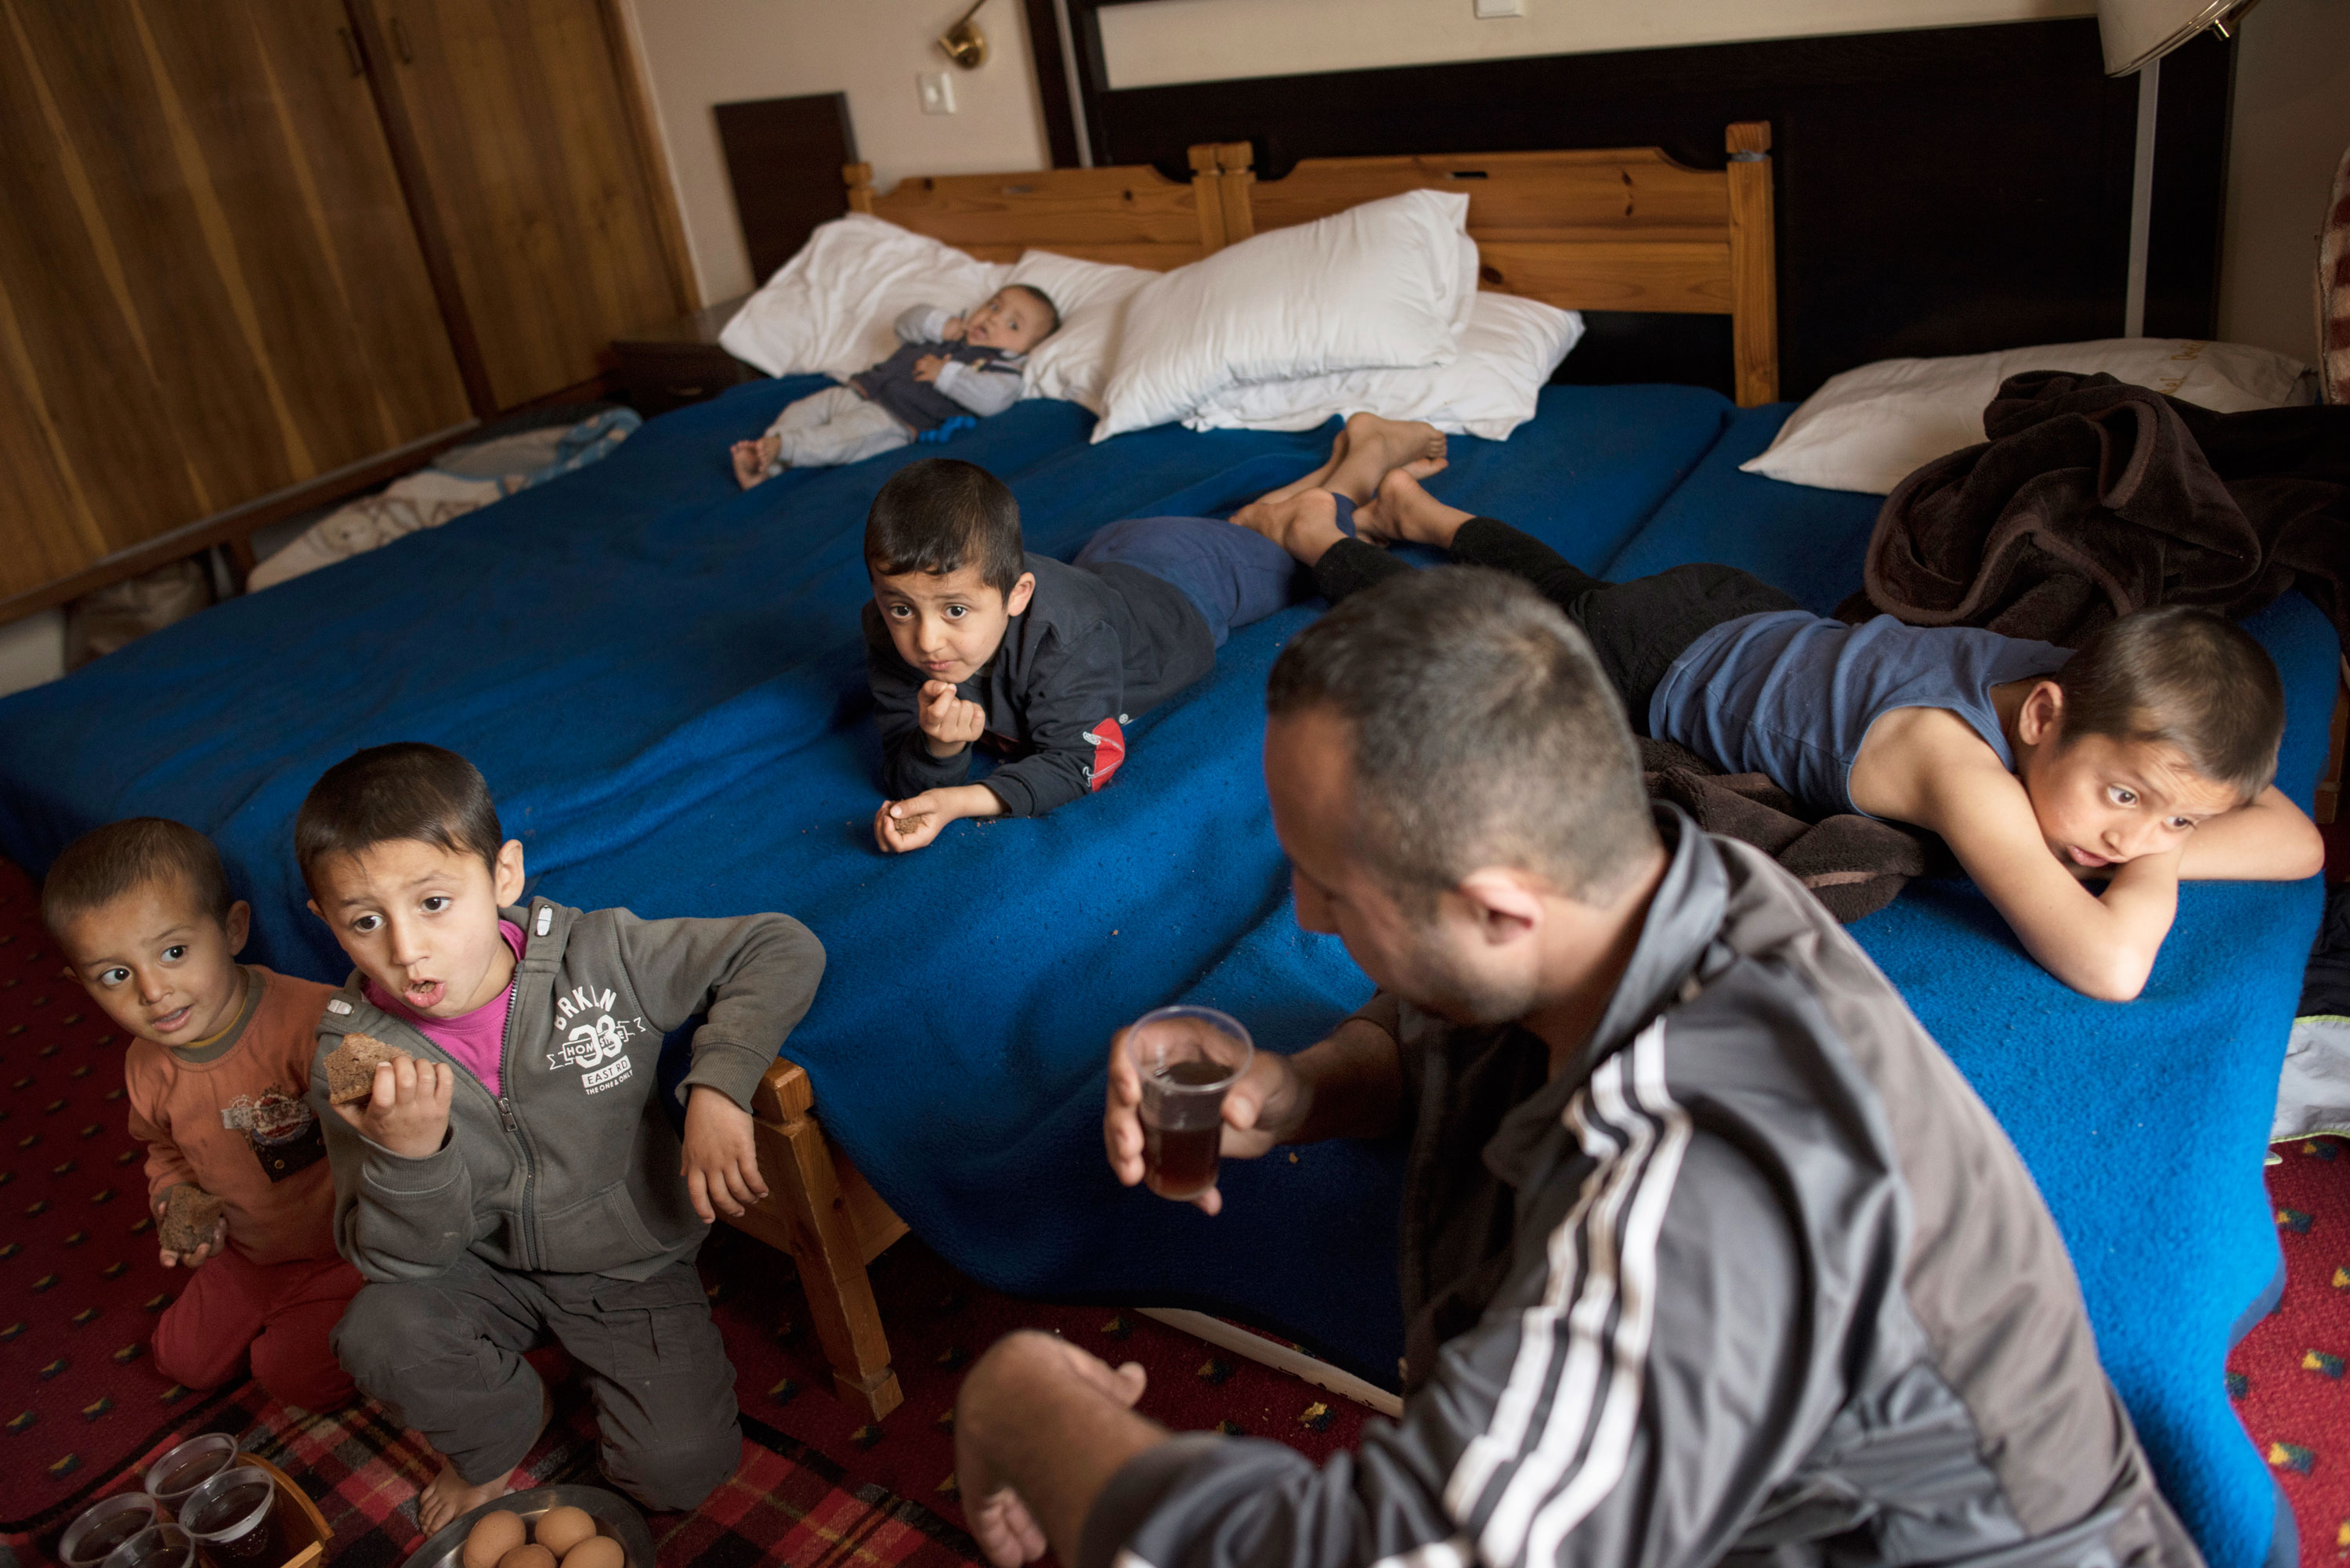 Minhel and the boys watch TV in a hotel room in Kastoria, Greece. Their lives are still in limbo